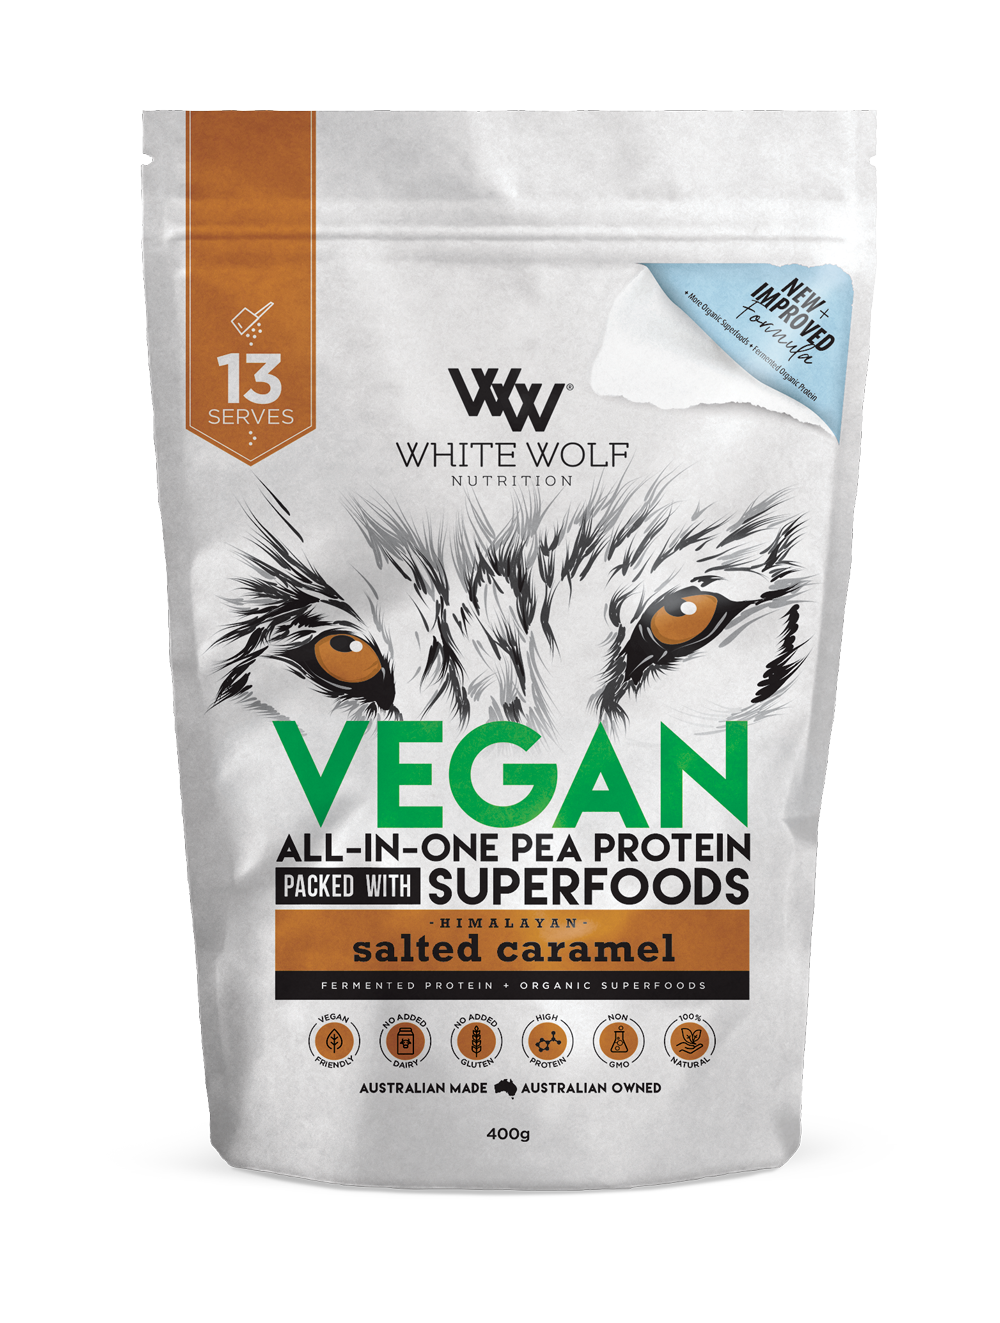 White Wolf Vegan All-in One Pea Protein With Superfoods